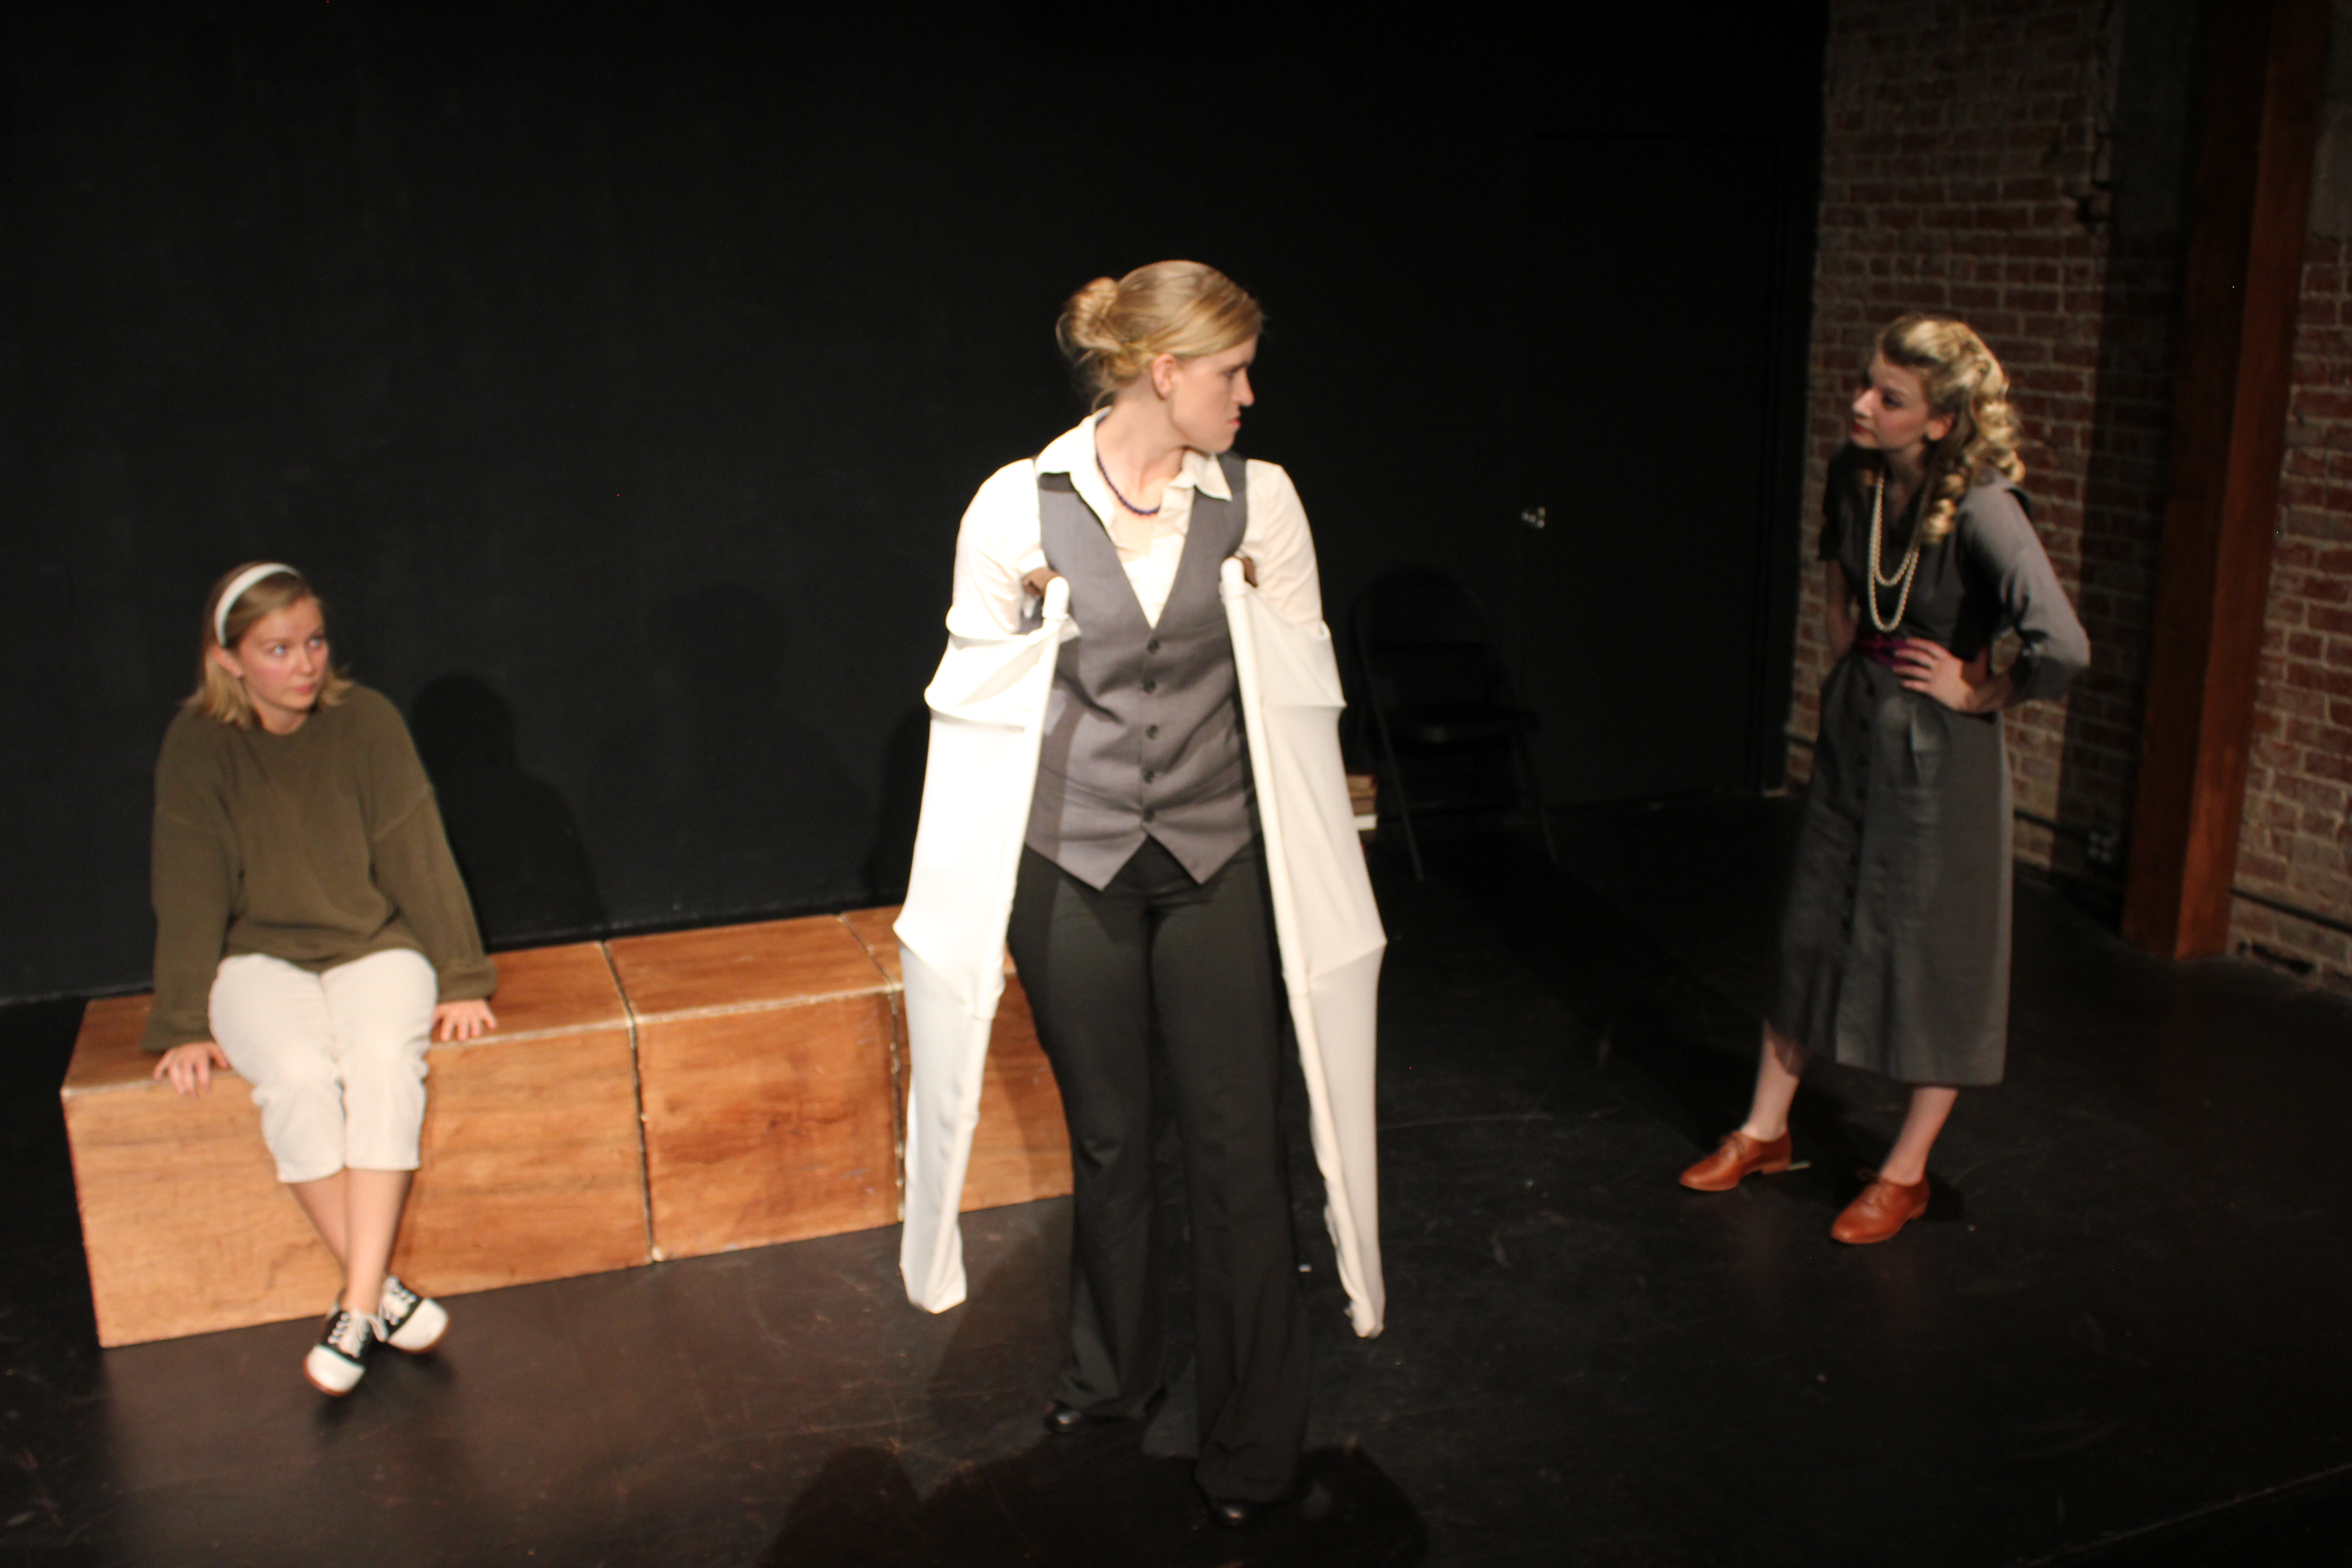 Sienna Beckman, Kari Swanson and Alyson Terwilliger in Lee Blessing's Eleemosynary Directed by Miranda Stewart for the 2015 Hollywood Fringe Festival